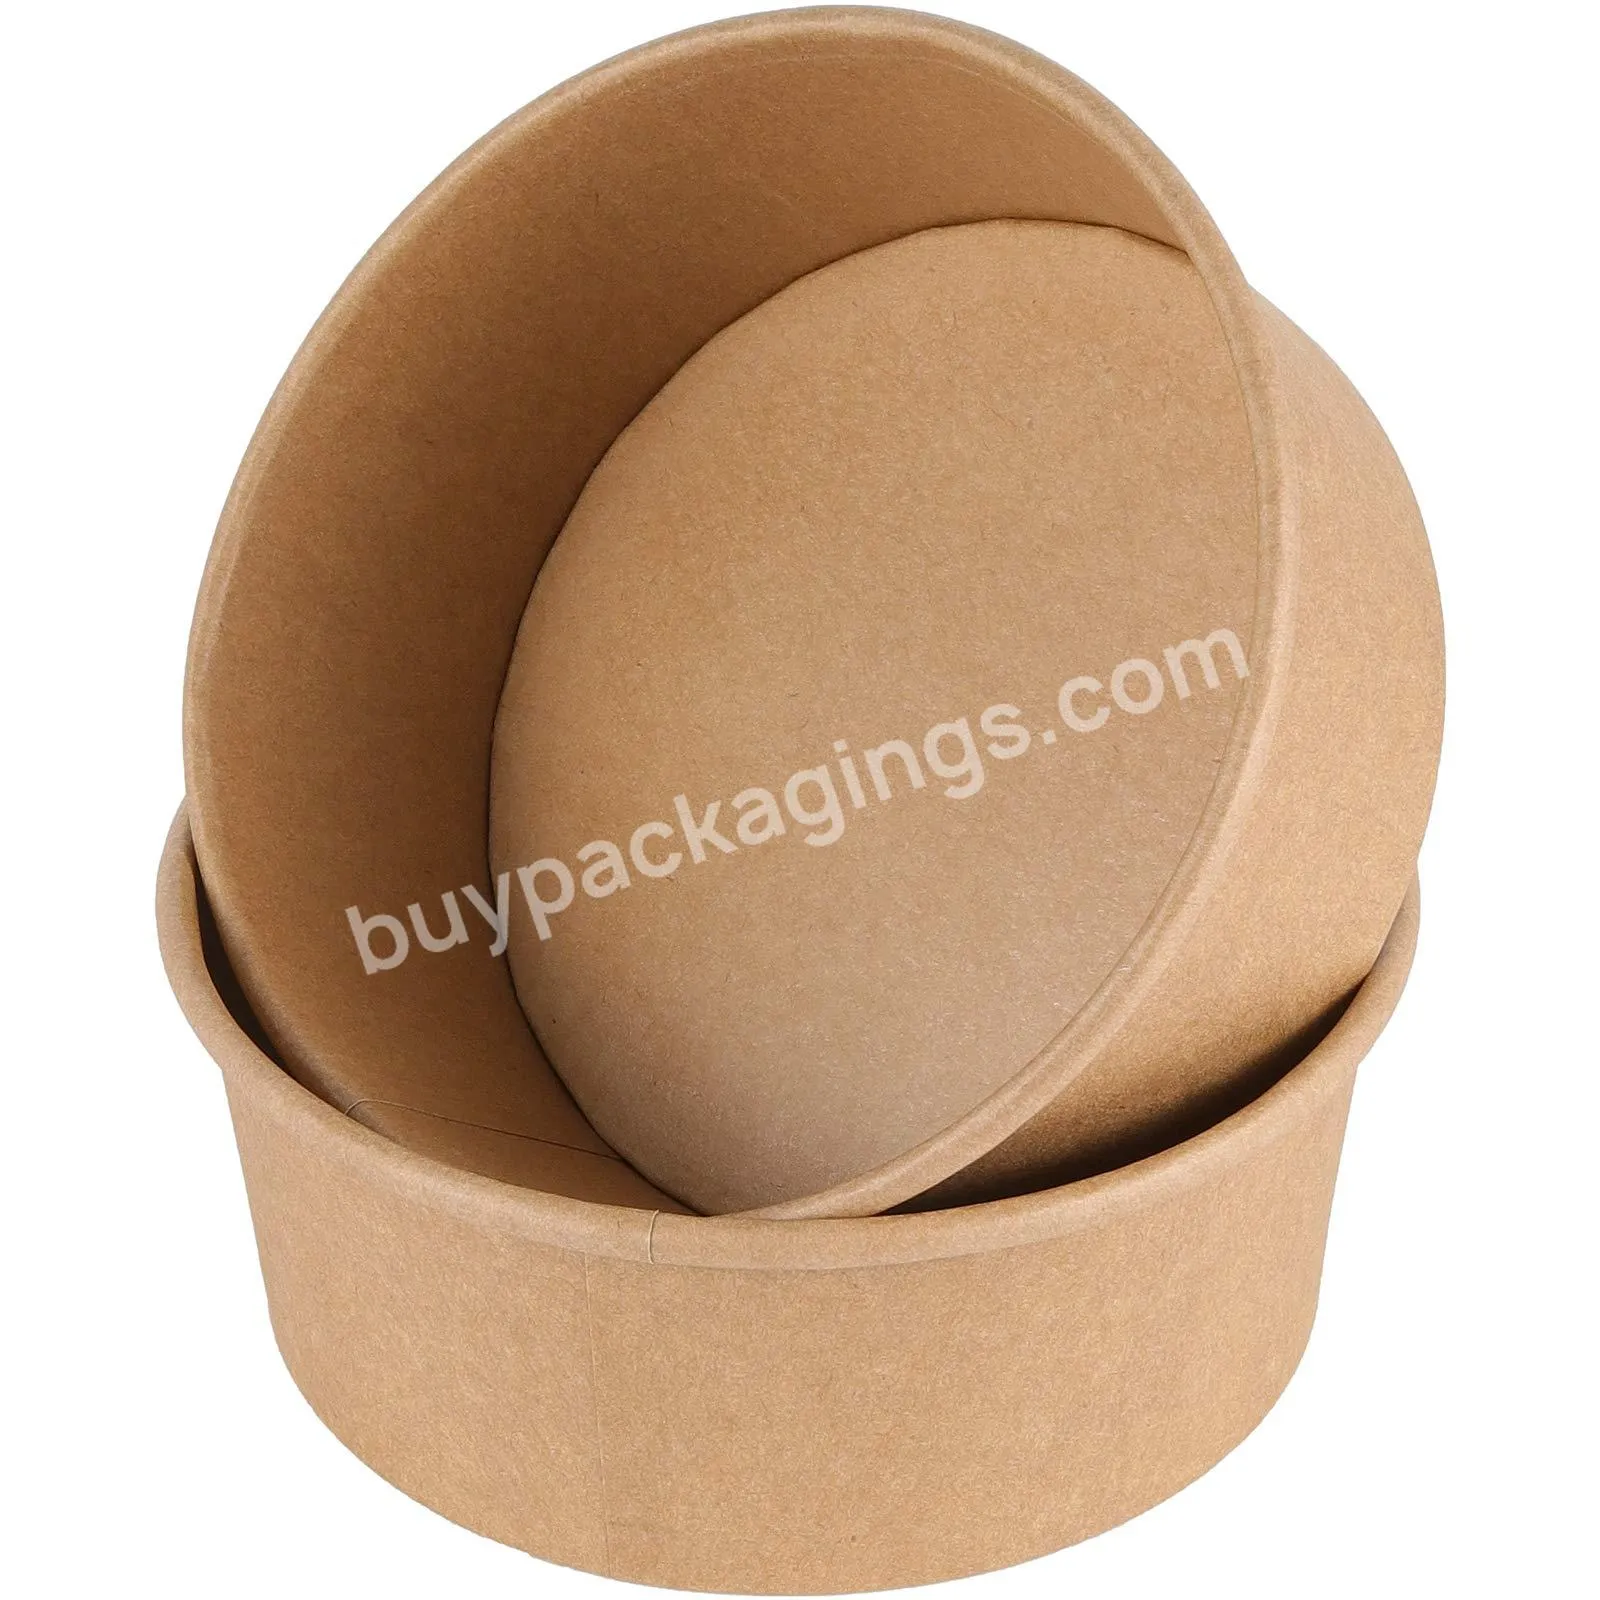 Hot Selling 37 Oz Brown Paper Bowls With Lids,Disposable Bowls For Salad,Soup,Hot/cold Food